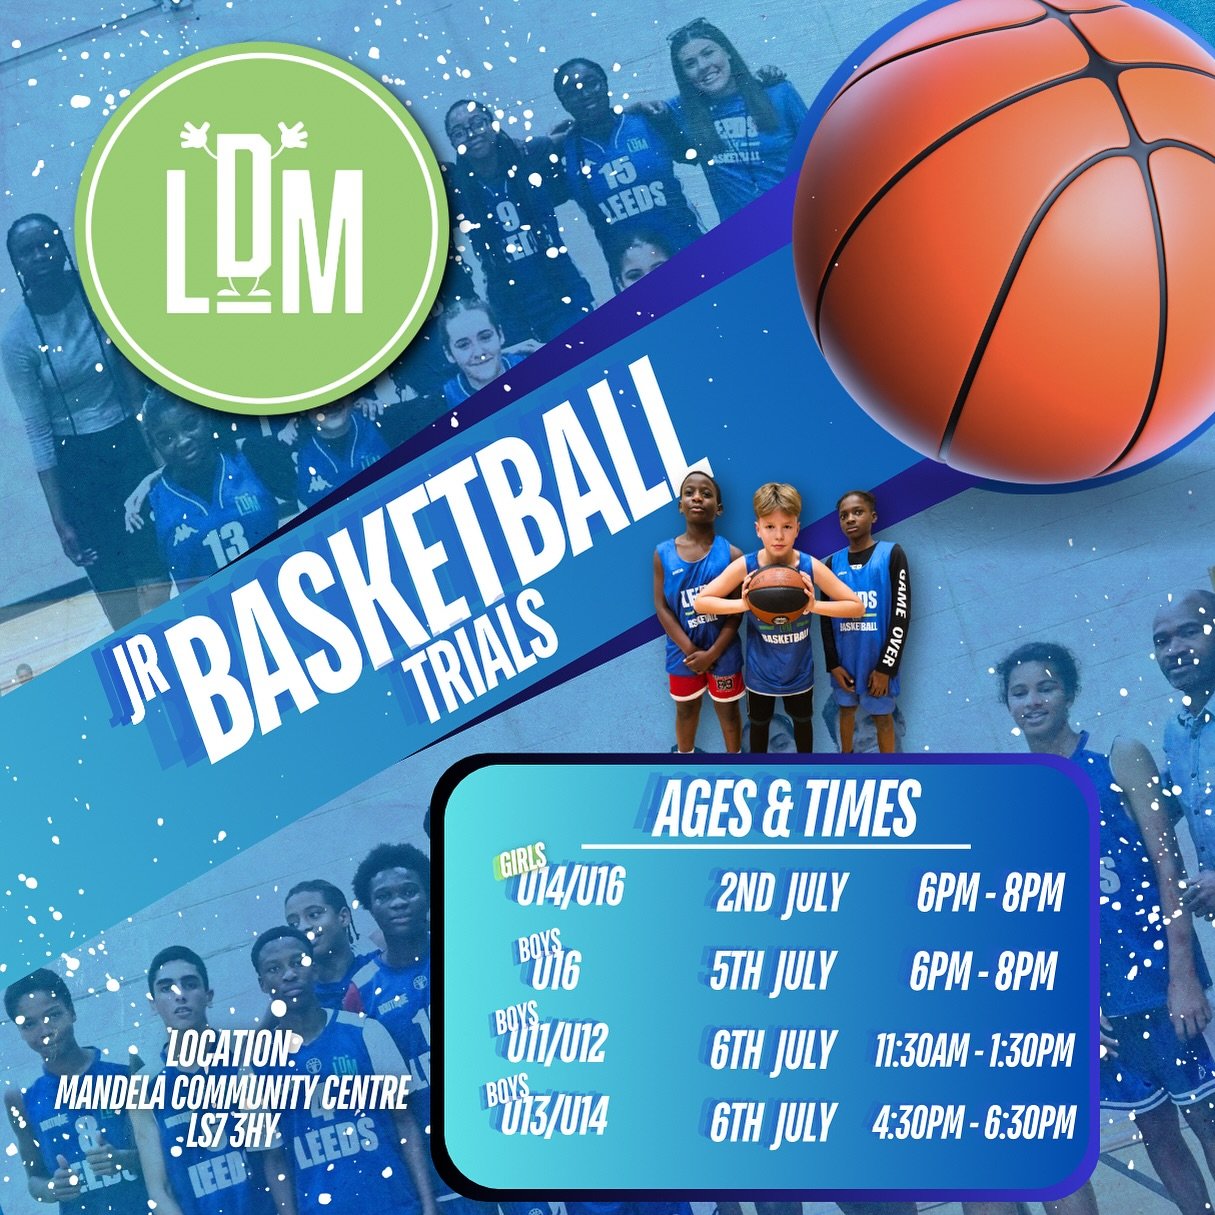 Calling all young basketball players 📣 ! Interested in joining our team? 

Our basketball trials for Jr NBL and regional league teams are coming in July! 

 Come down and show us what you got‼️

 Link in Bio🔗 🏀

#aspireforgreatness

#basketballtra